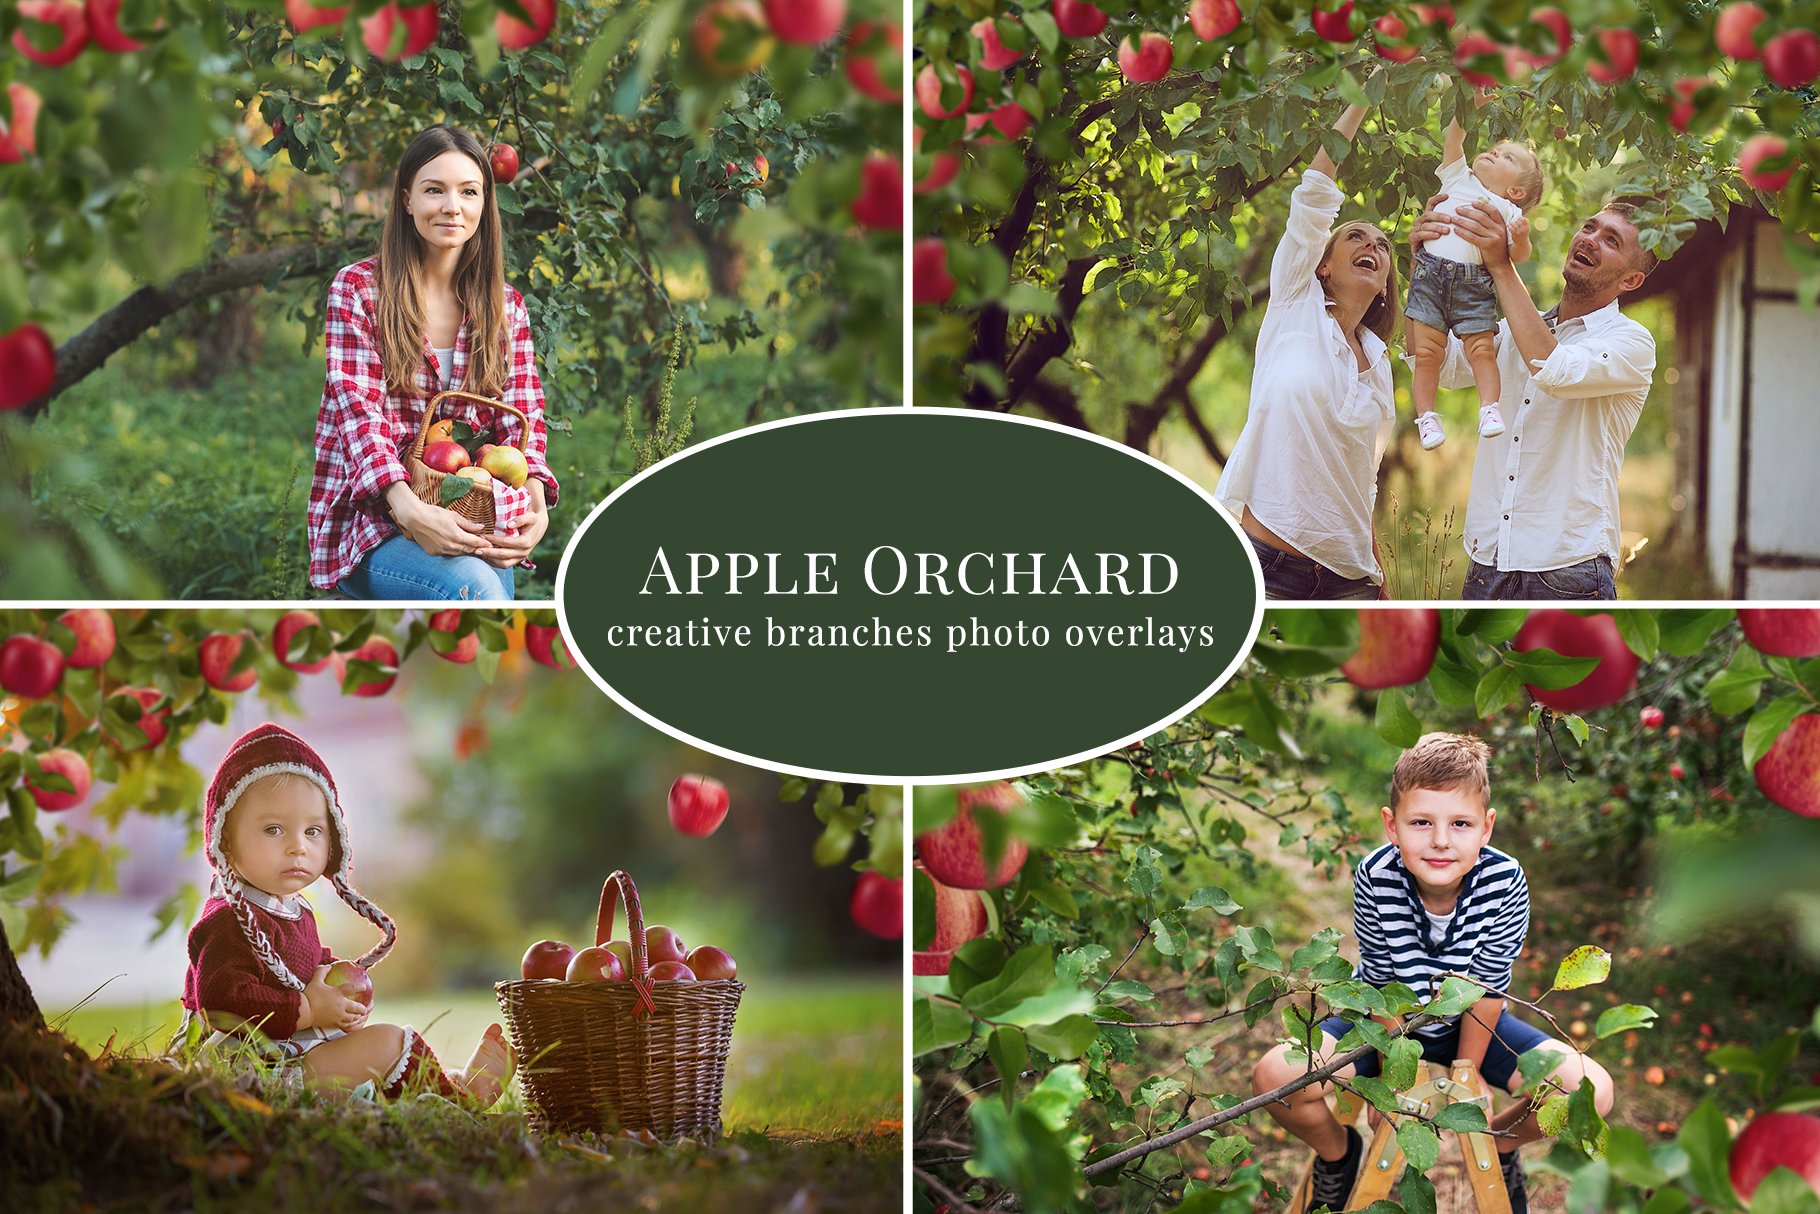 Apple Orchard photo overlayscover image.